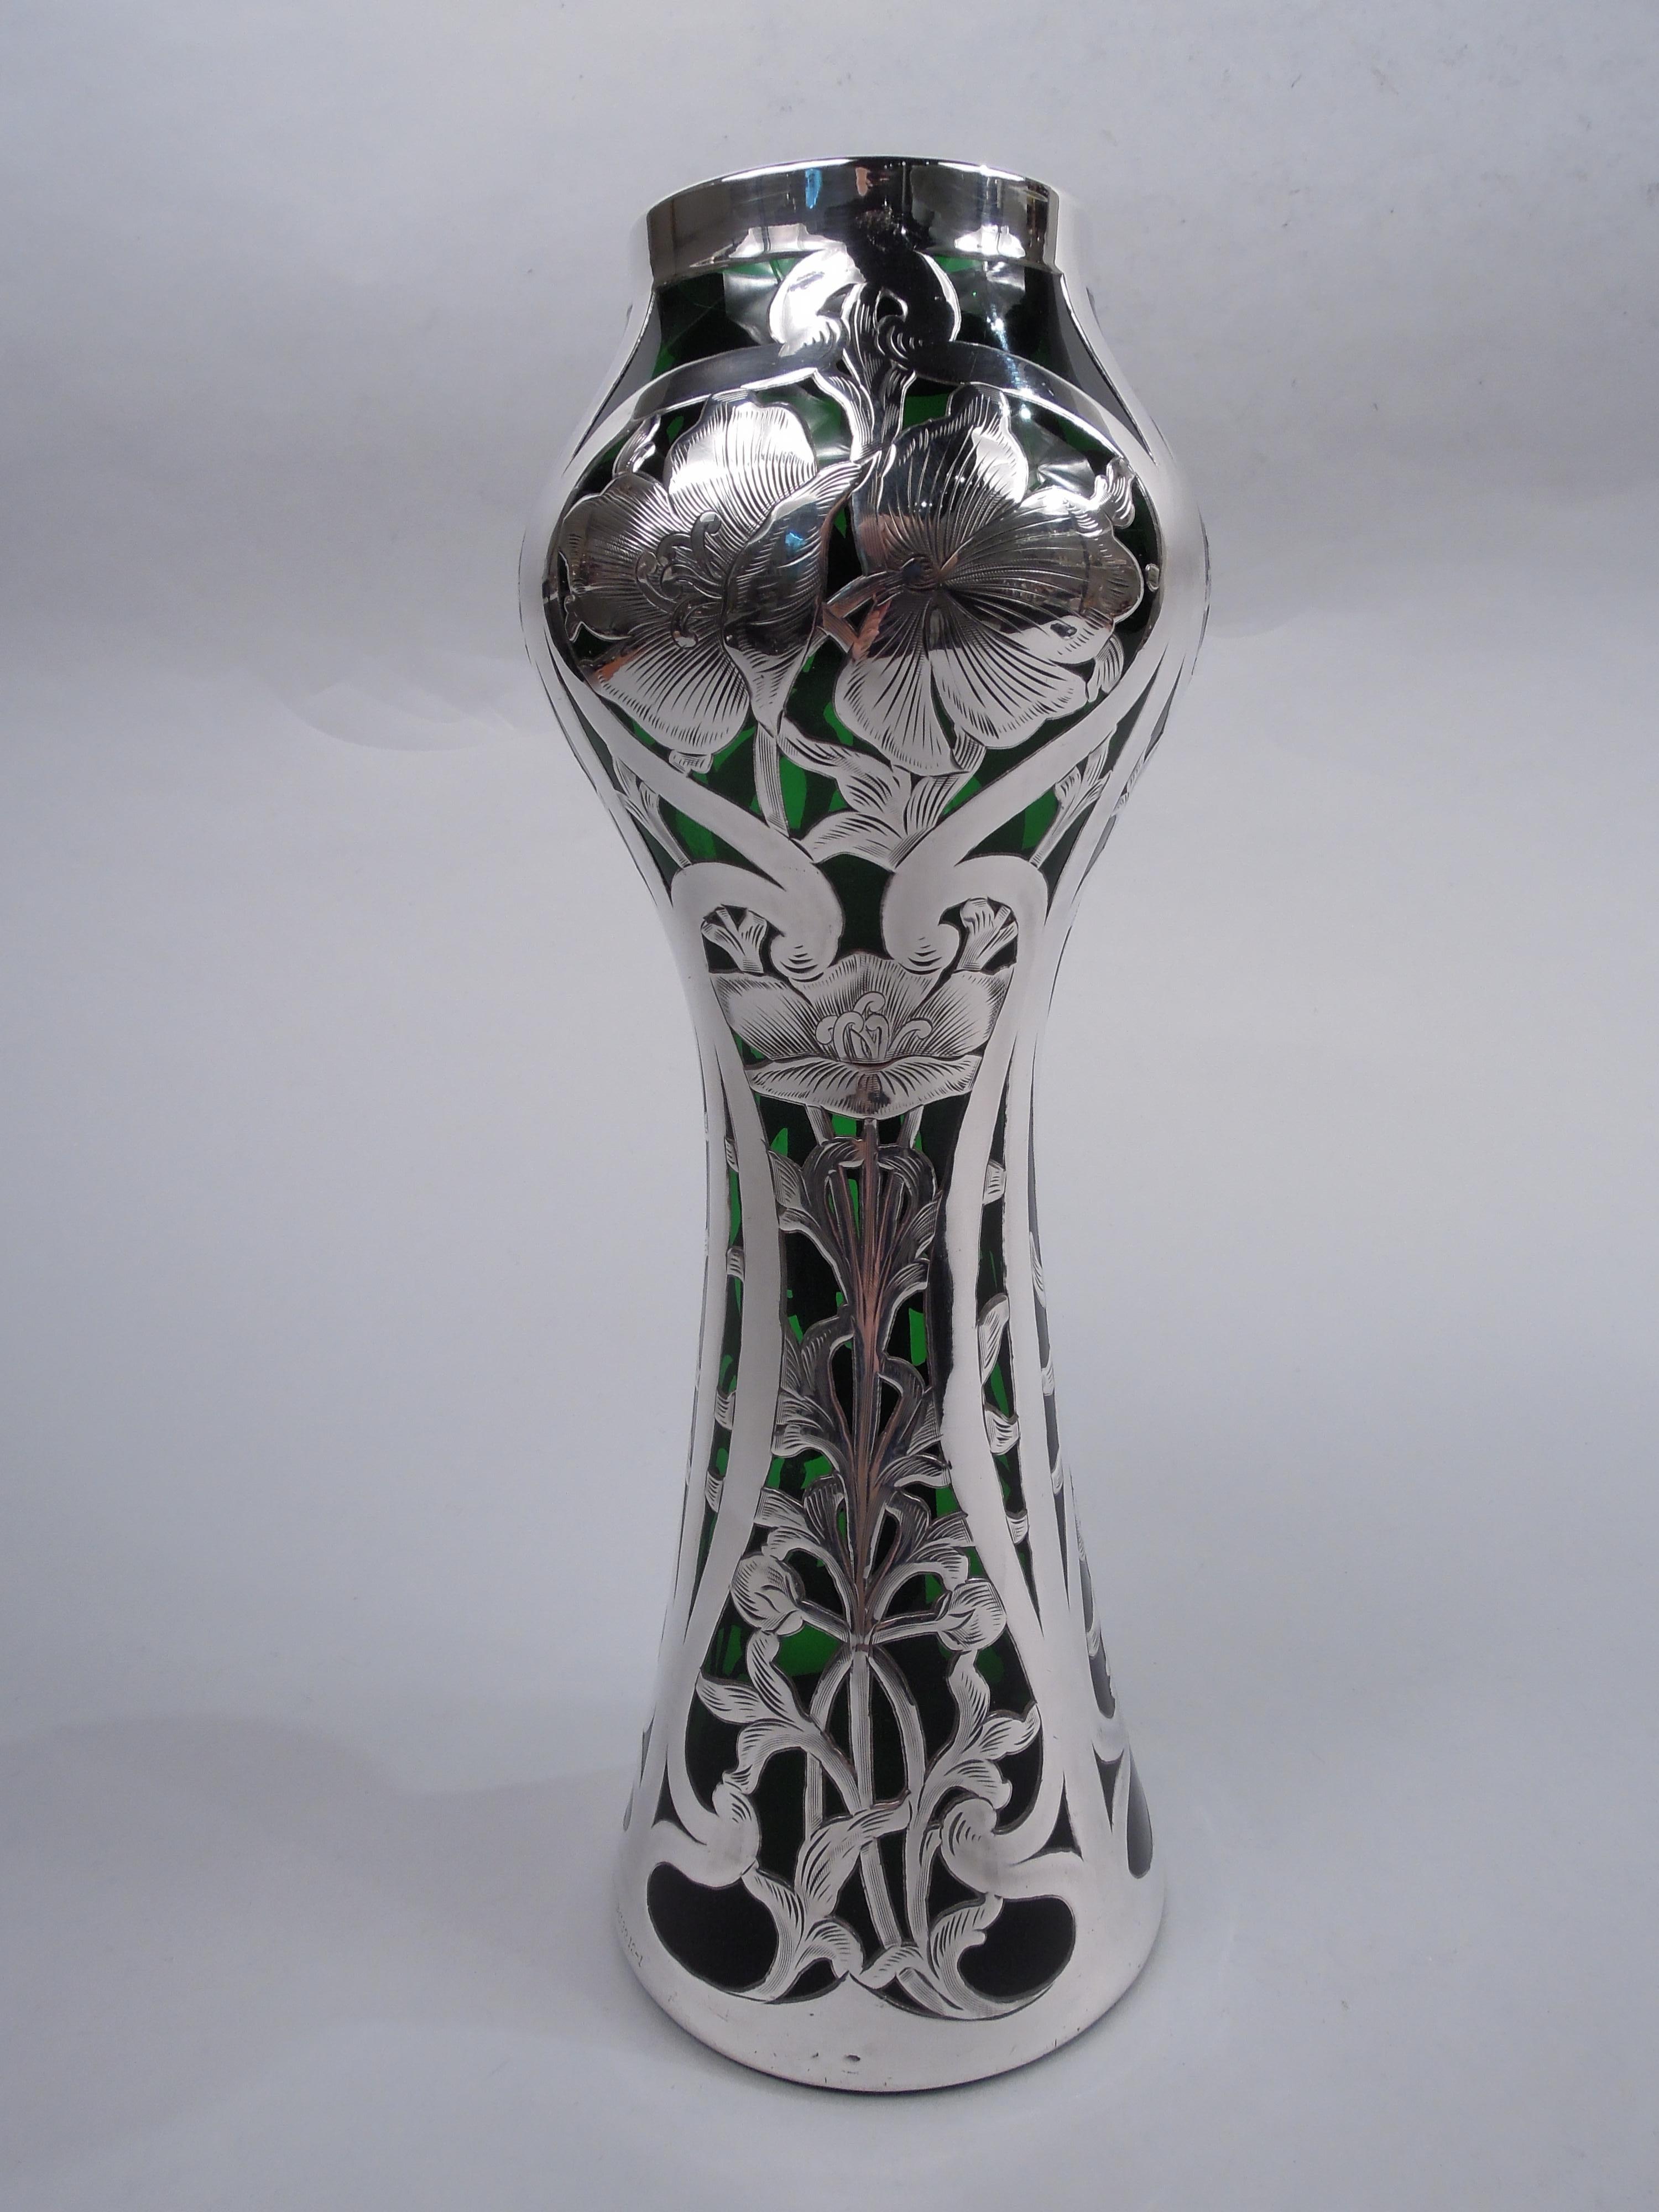 Art Nouveau glass vase with engraved silver overlay. Made by Alvin Corp. in Providence, ca 1900. Baluster on cone. Overlay in form of vertical flowering stems overlooking wide and plain scrolled and whiplash frames. Silver fully marked including